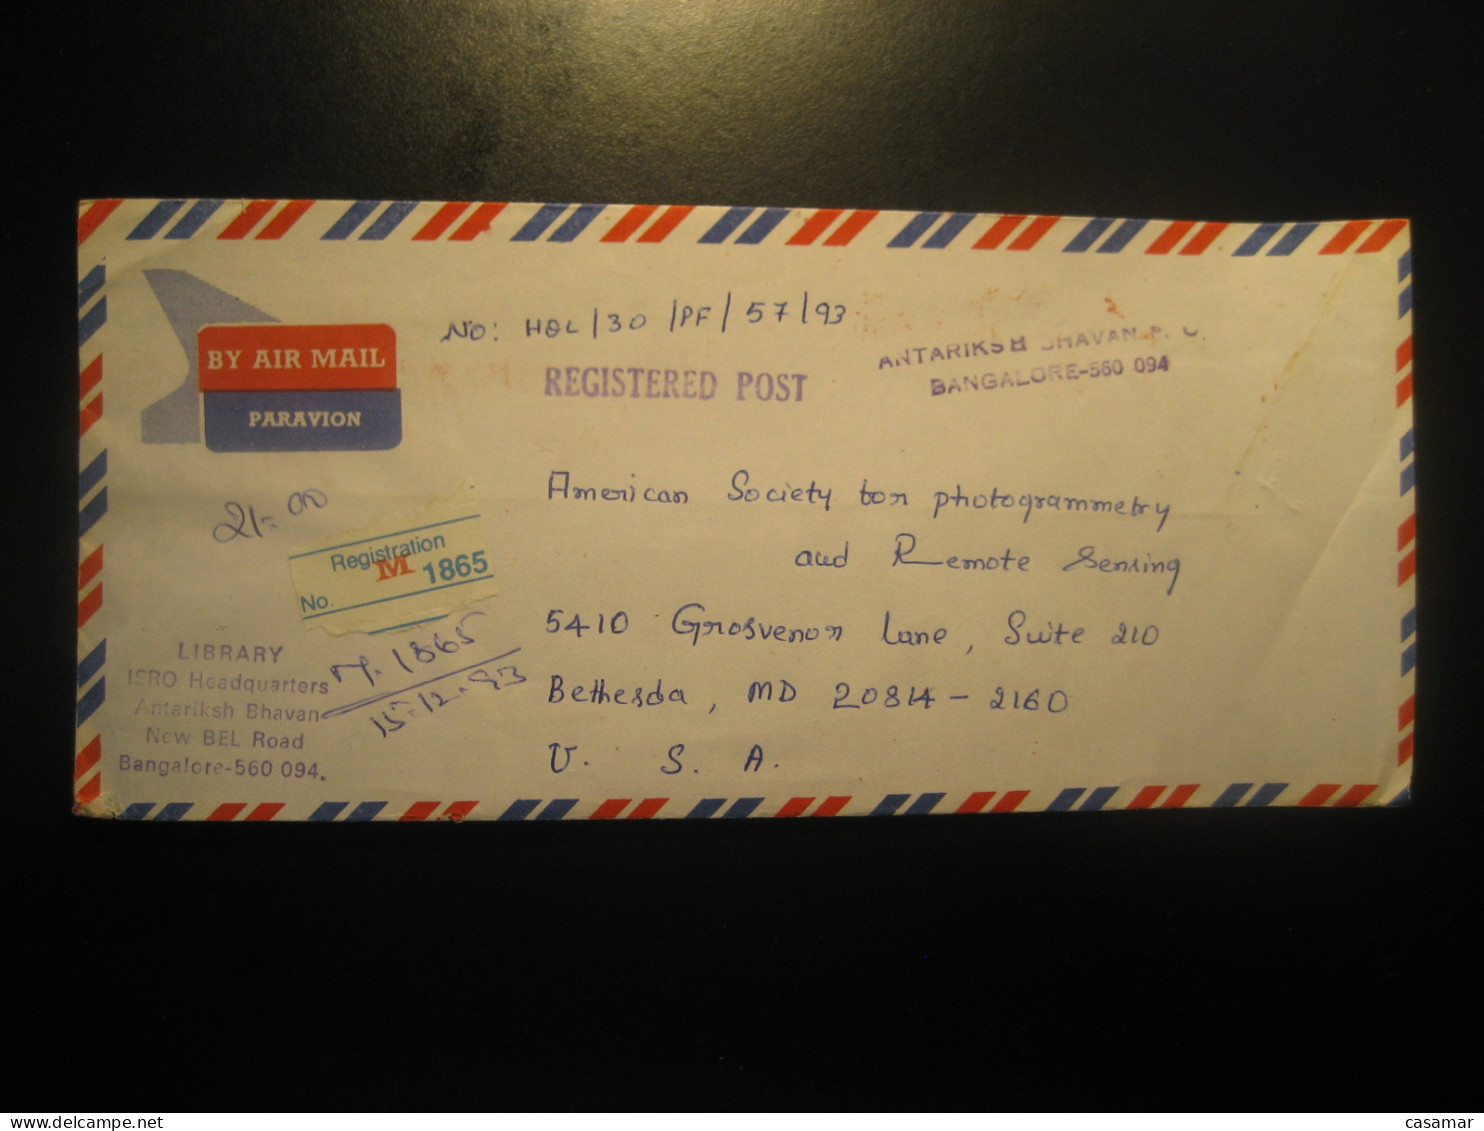 BANGALORE 1993 To USA Antariksh Bhavan ISRO Space Spatial Registered Air Mail Cancel Cover INDIA - Asia